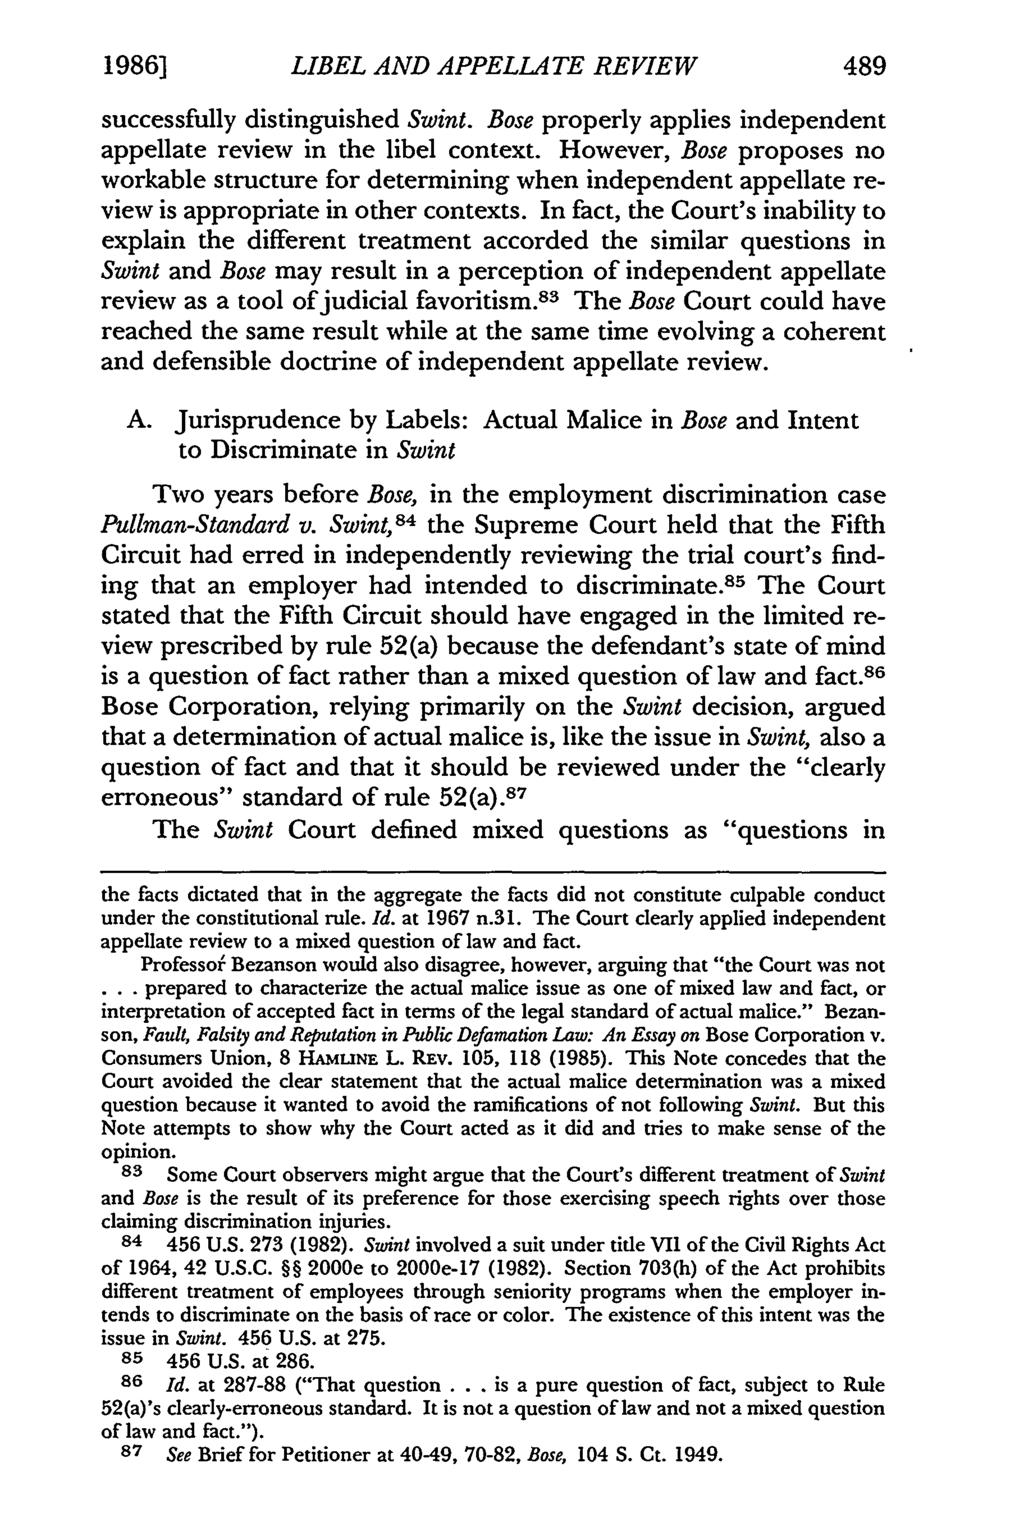 19861 LIBEL AND APPELLATE REVIEW 489 successfully distinguished Swint. Bose properly applies independent appellate review in the libel context.